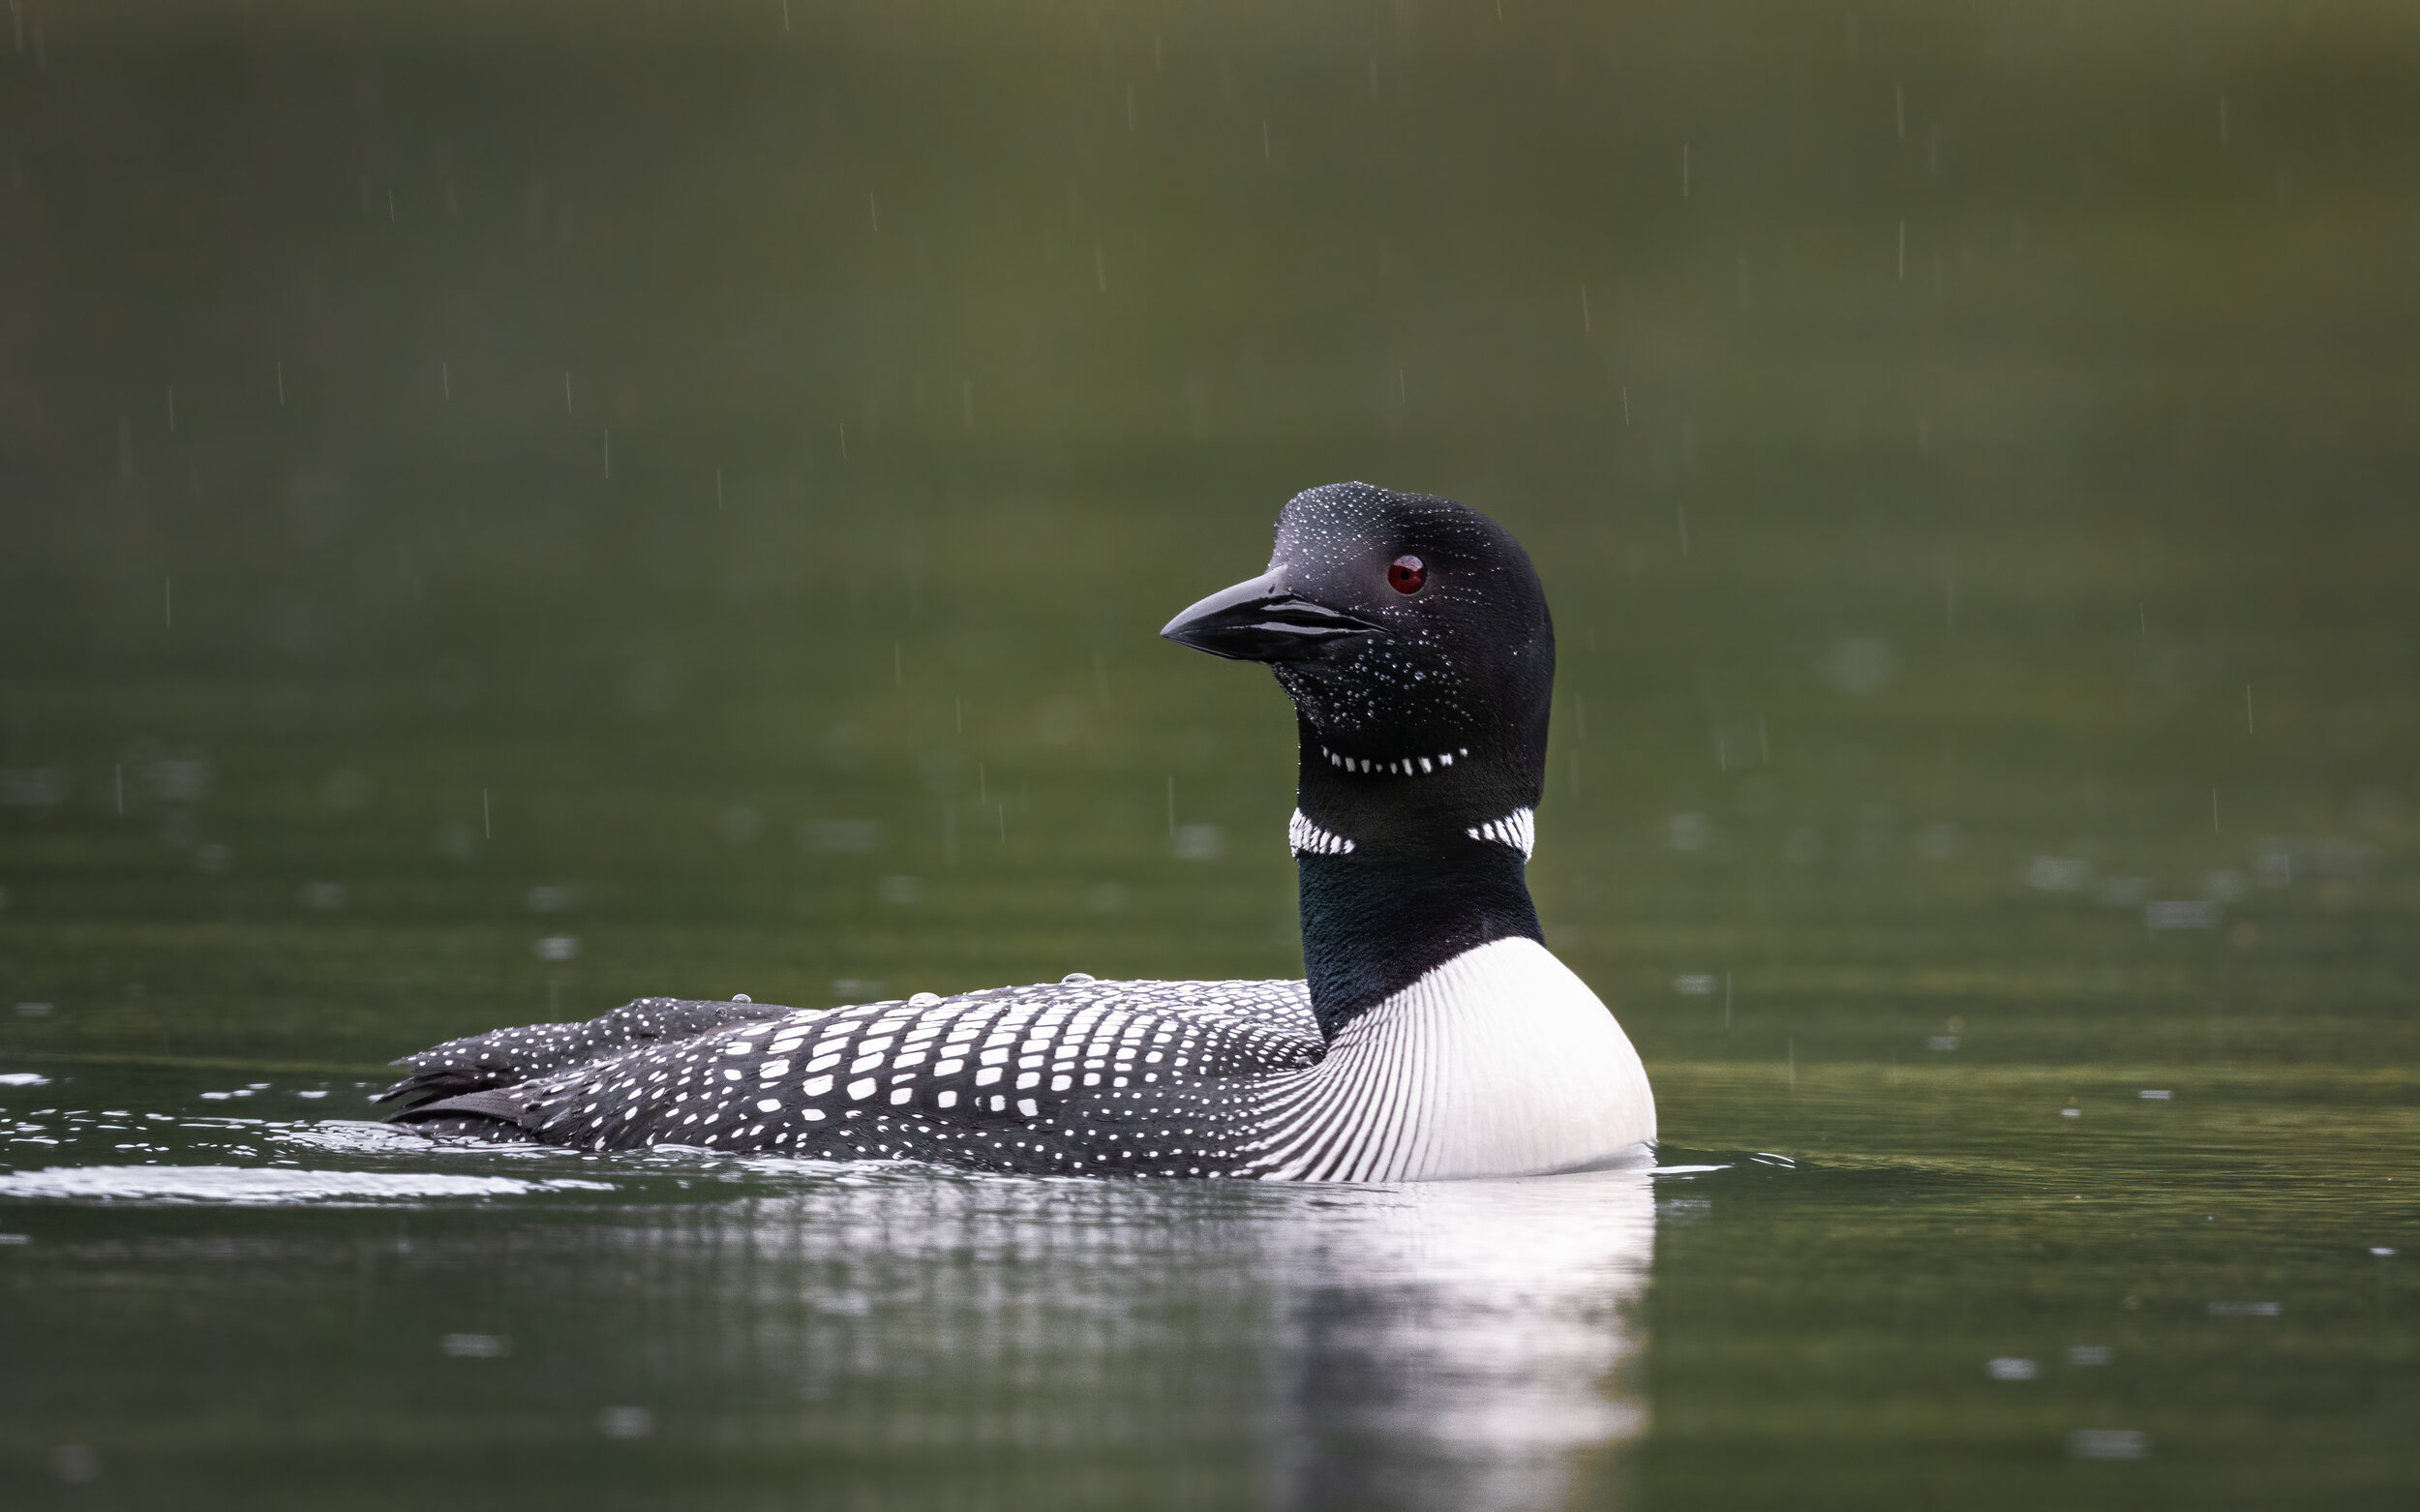  Common loon patrolling his lake on a rainy evening. 